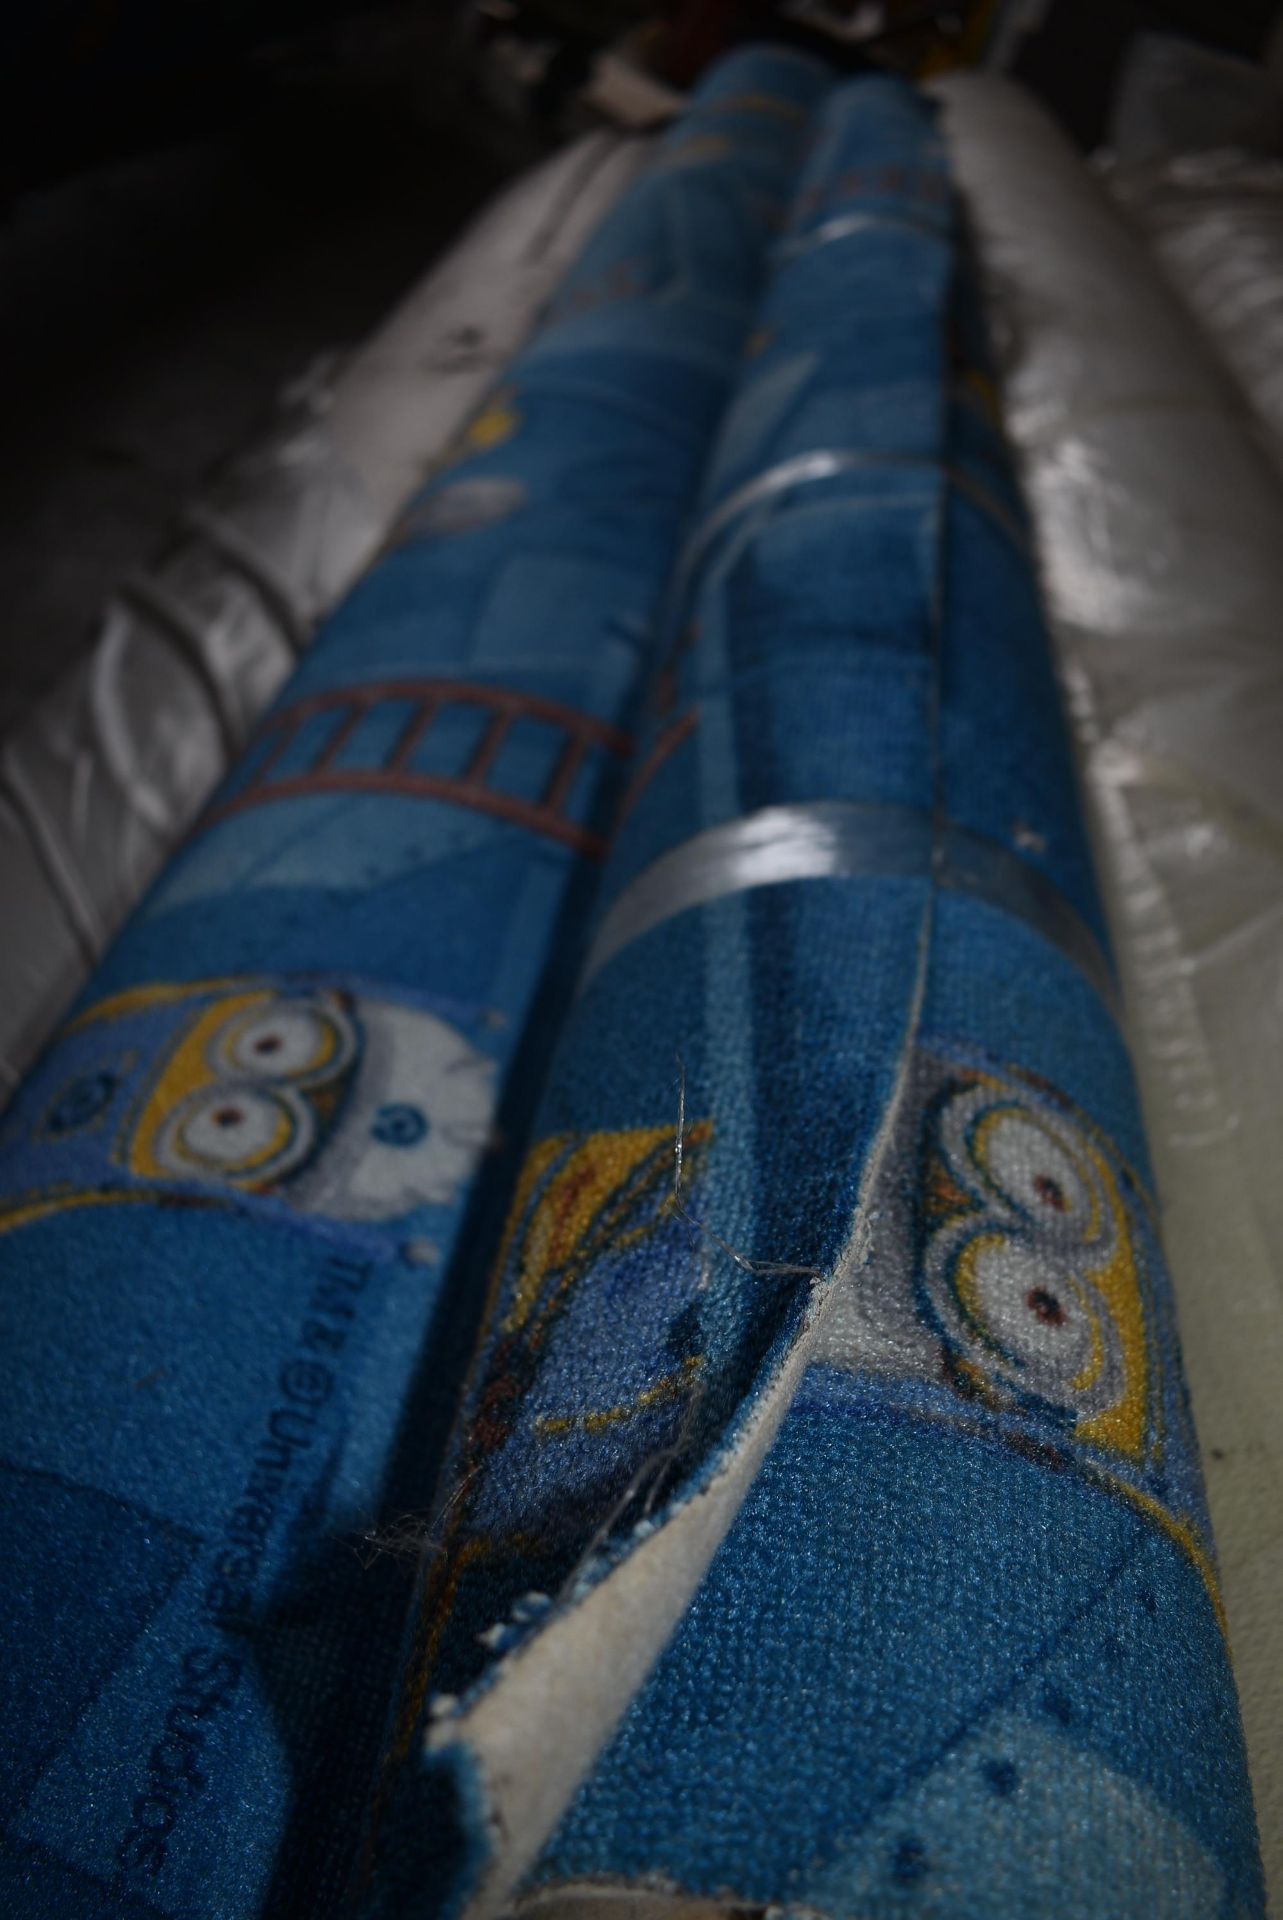 4m wide Roll of Minions Blue Carpet plus Offcut - Image 2 of 2